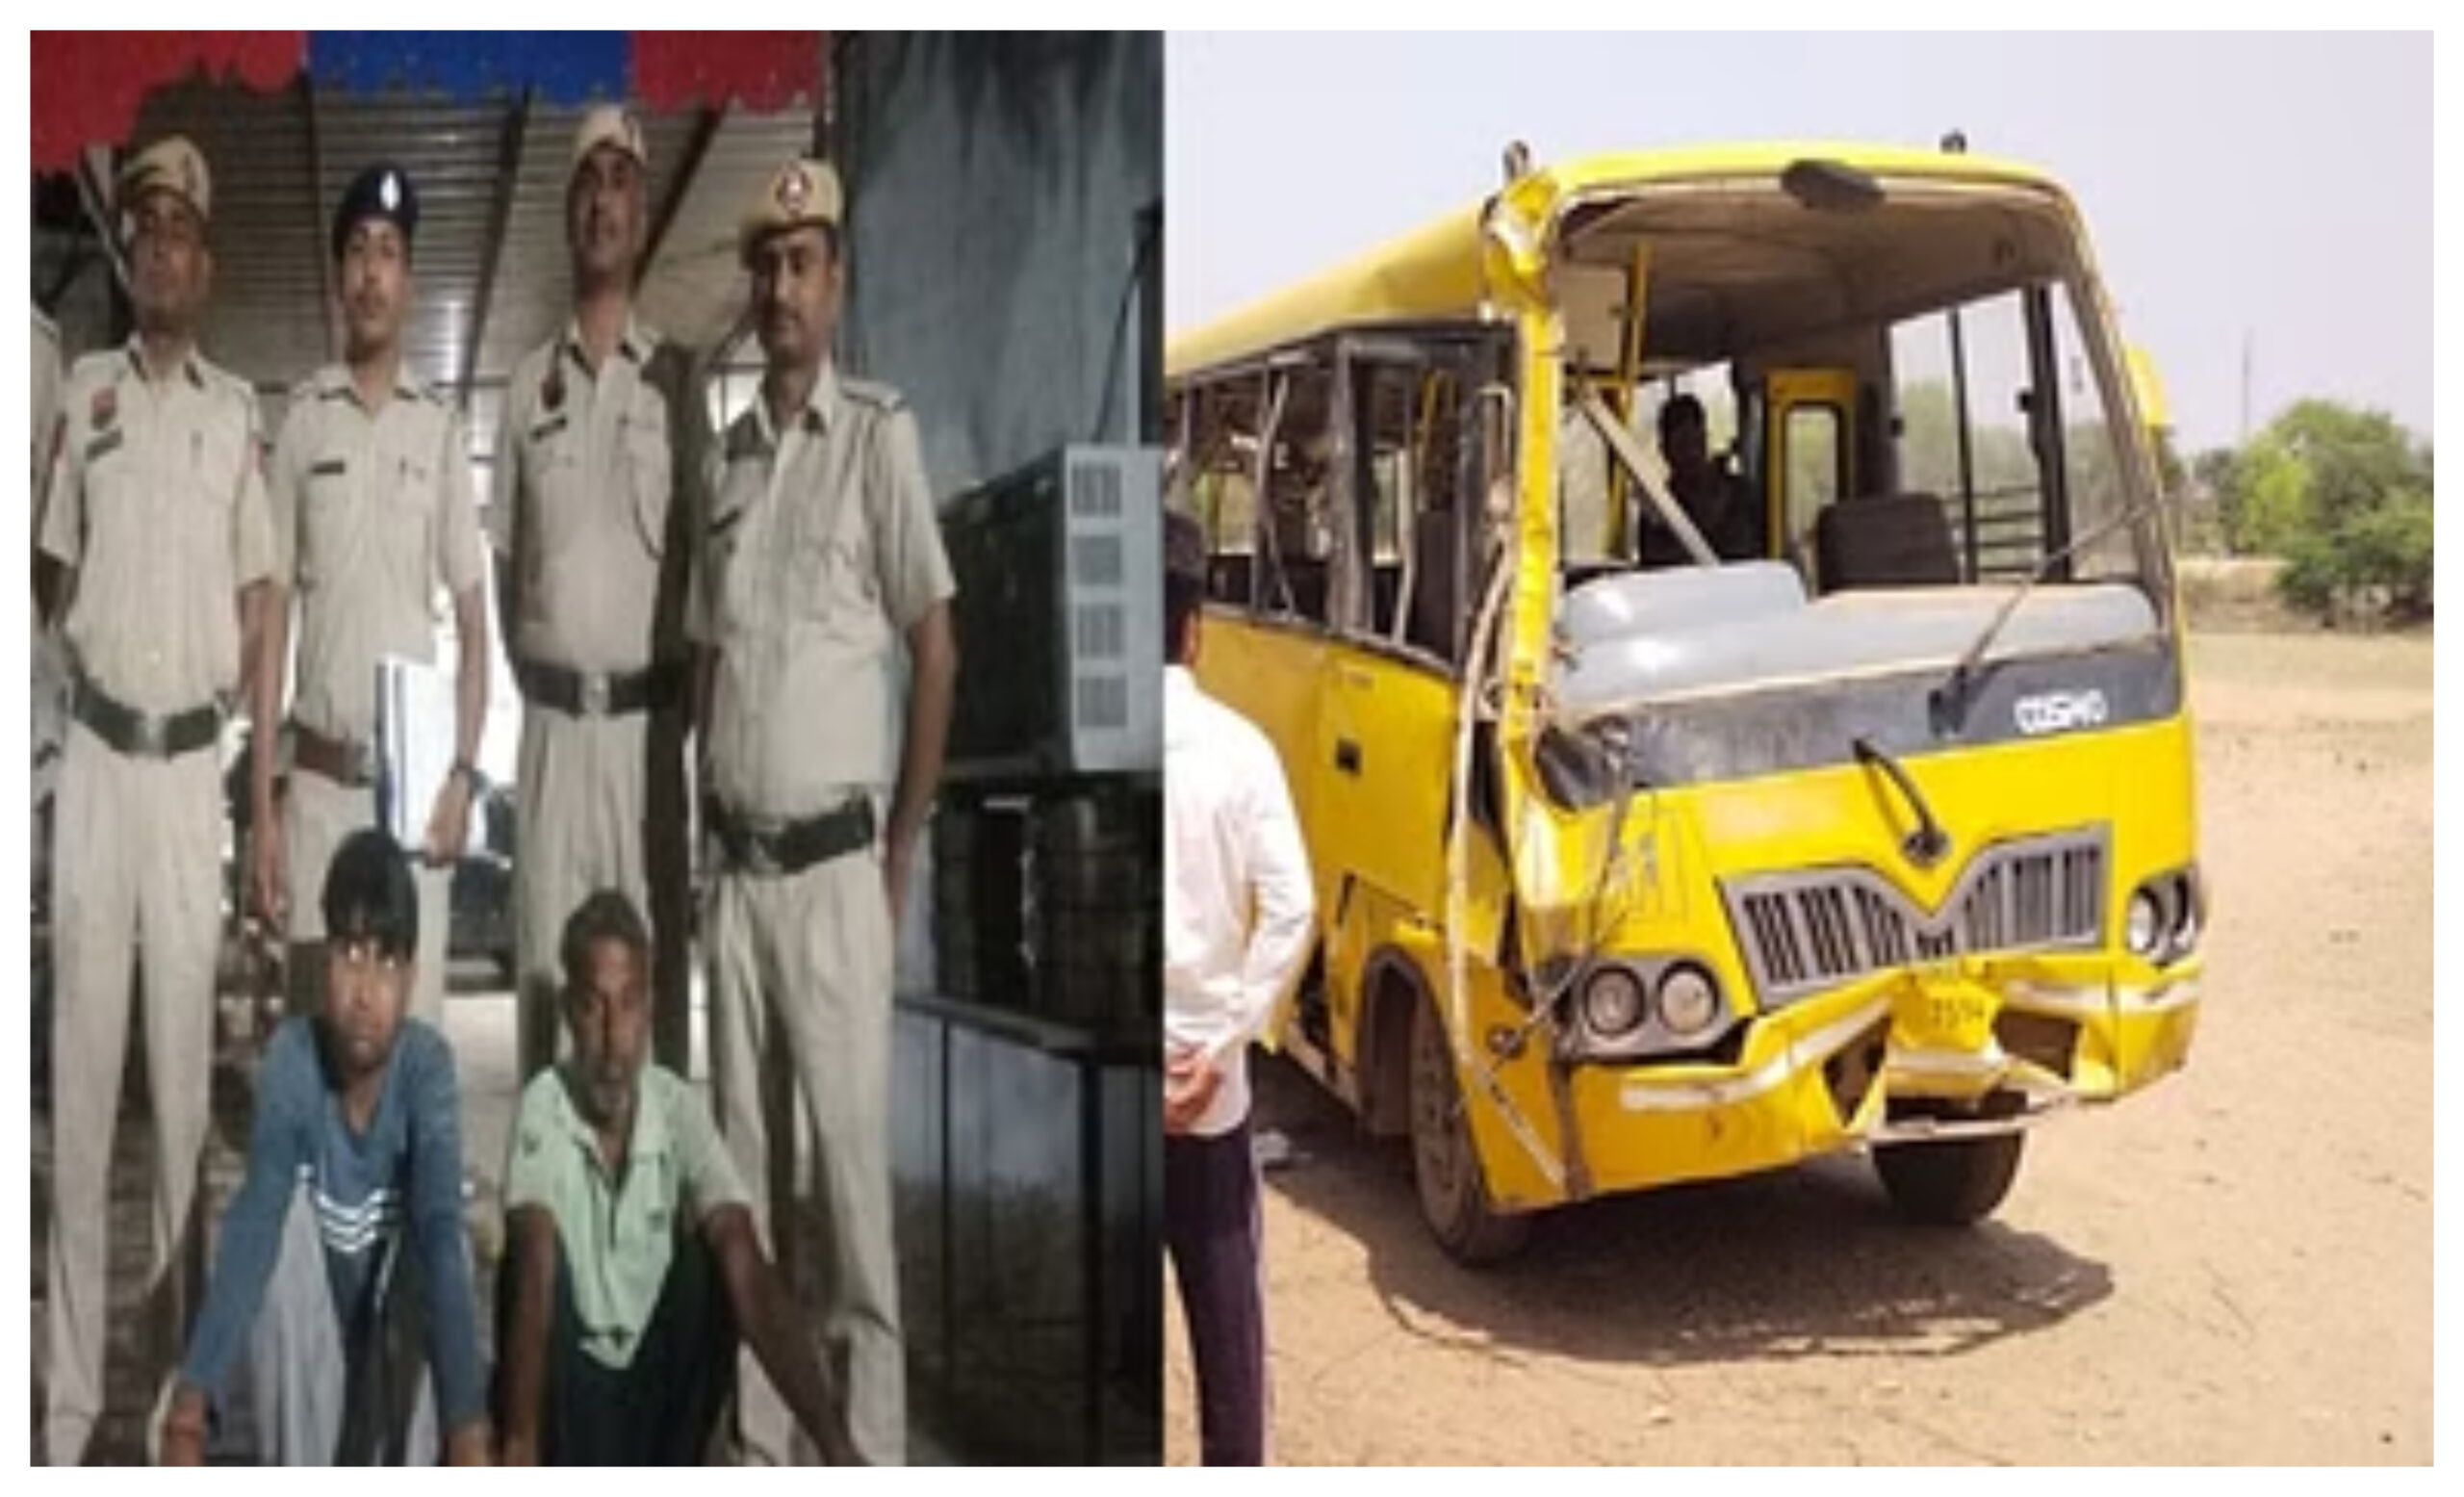 Mahendragarh Bus Accident: Driver used to drink alcohol in the bus, police arrested two accused, mahendragarh-school-bus-accident-driver-drunk-alcohol-in-bus In hindi news, mahendragarh accidnet, mahendragarh bus accident, mahendragarh news, mahendragarh bus accident news, mahendragarh news, bus accident news,